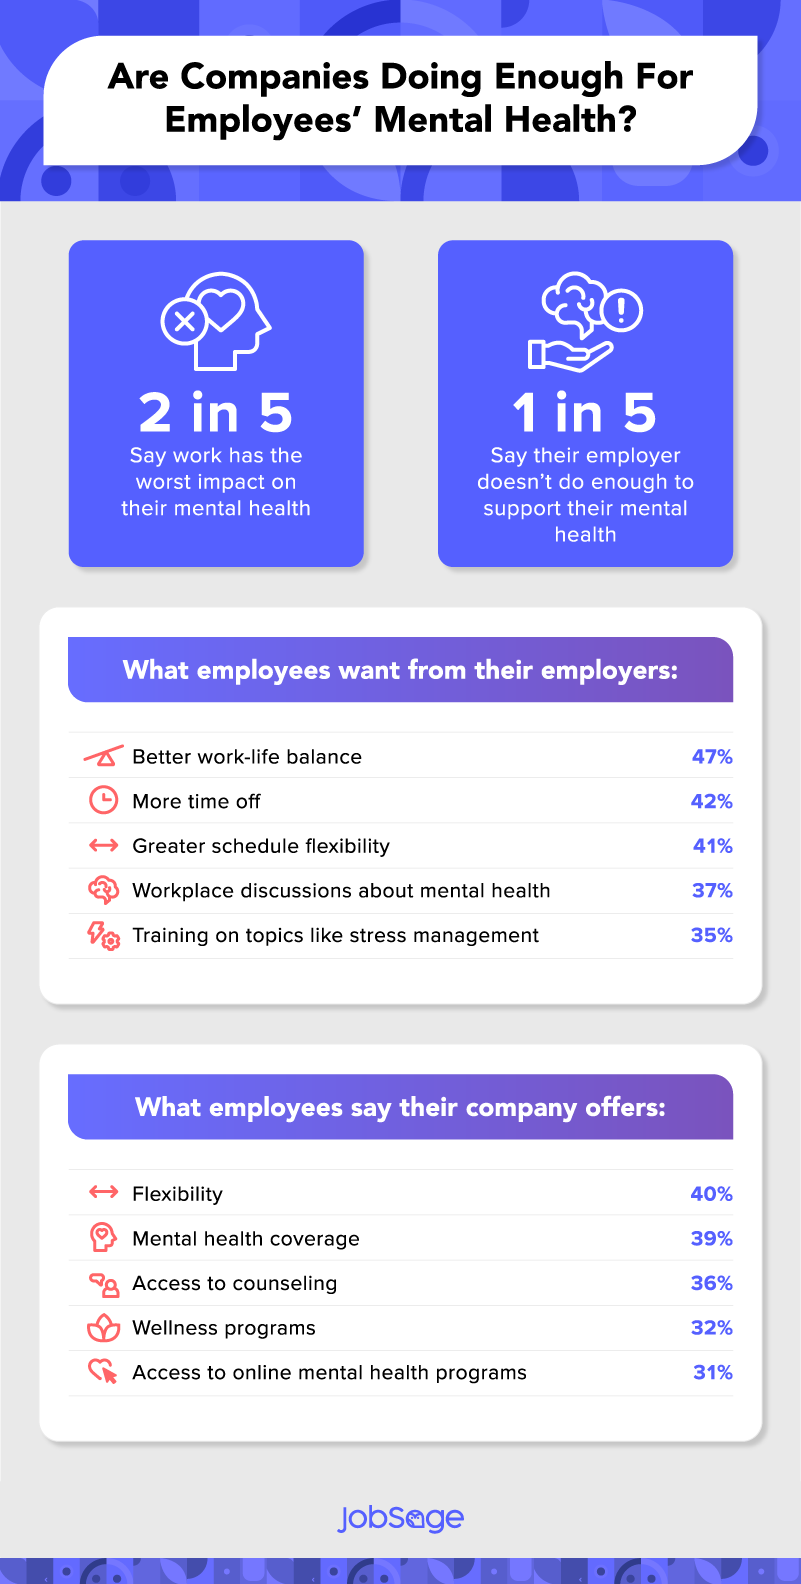 what are companies doing to support employee mental health